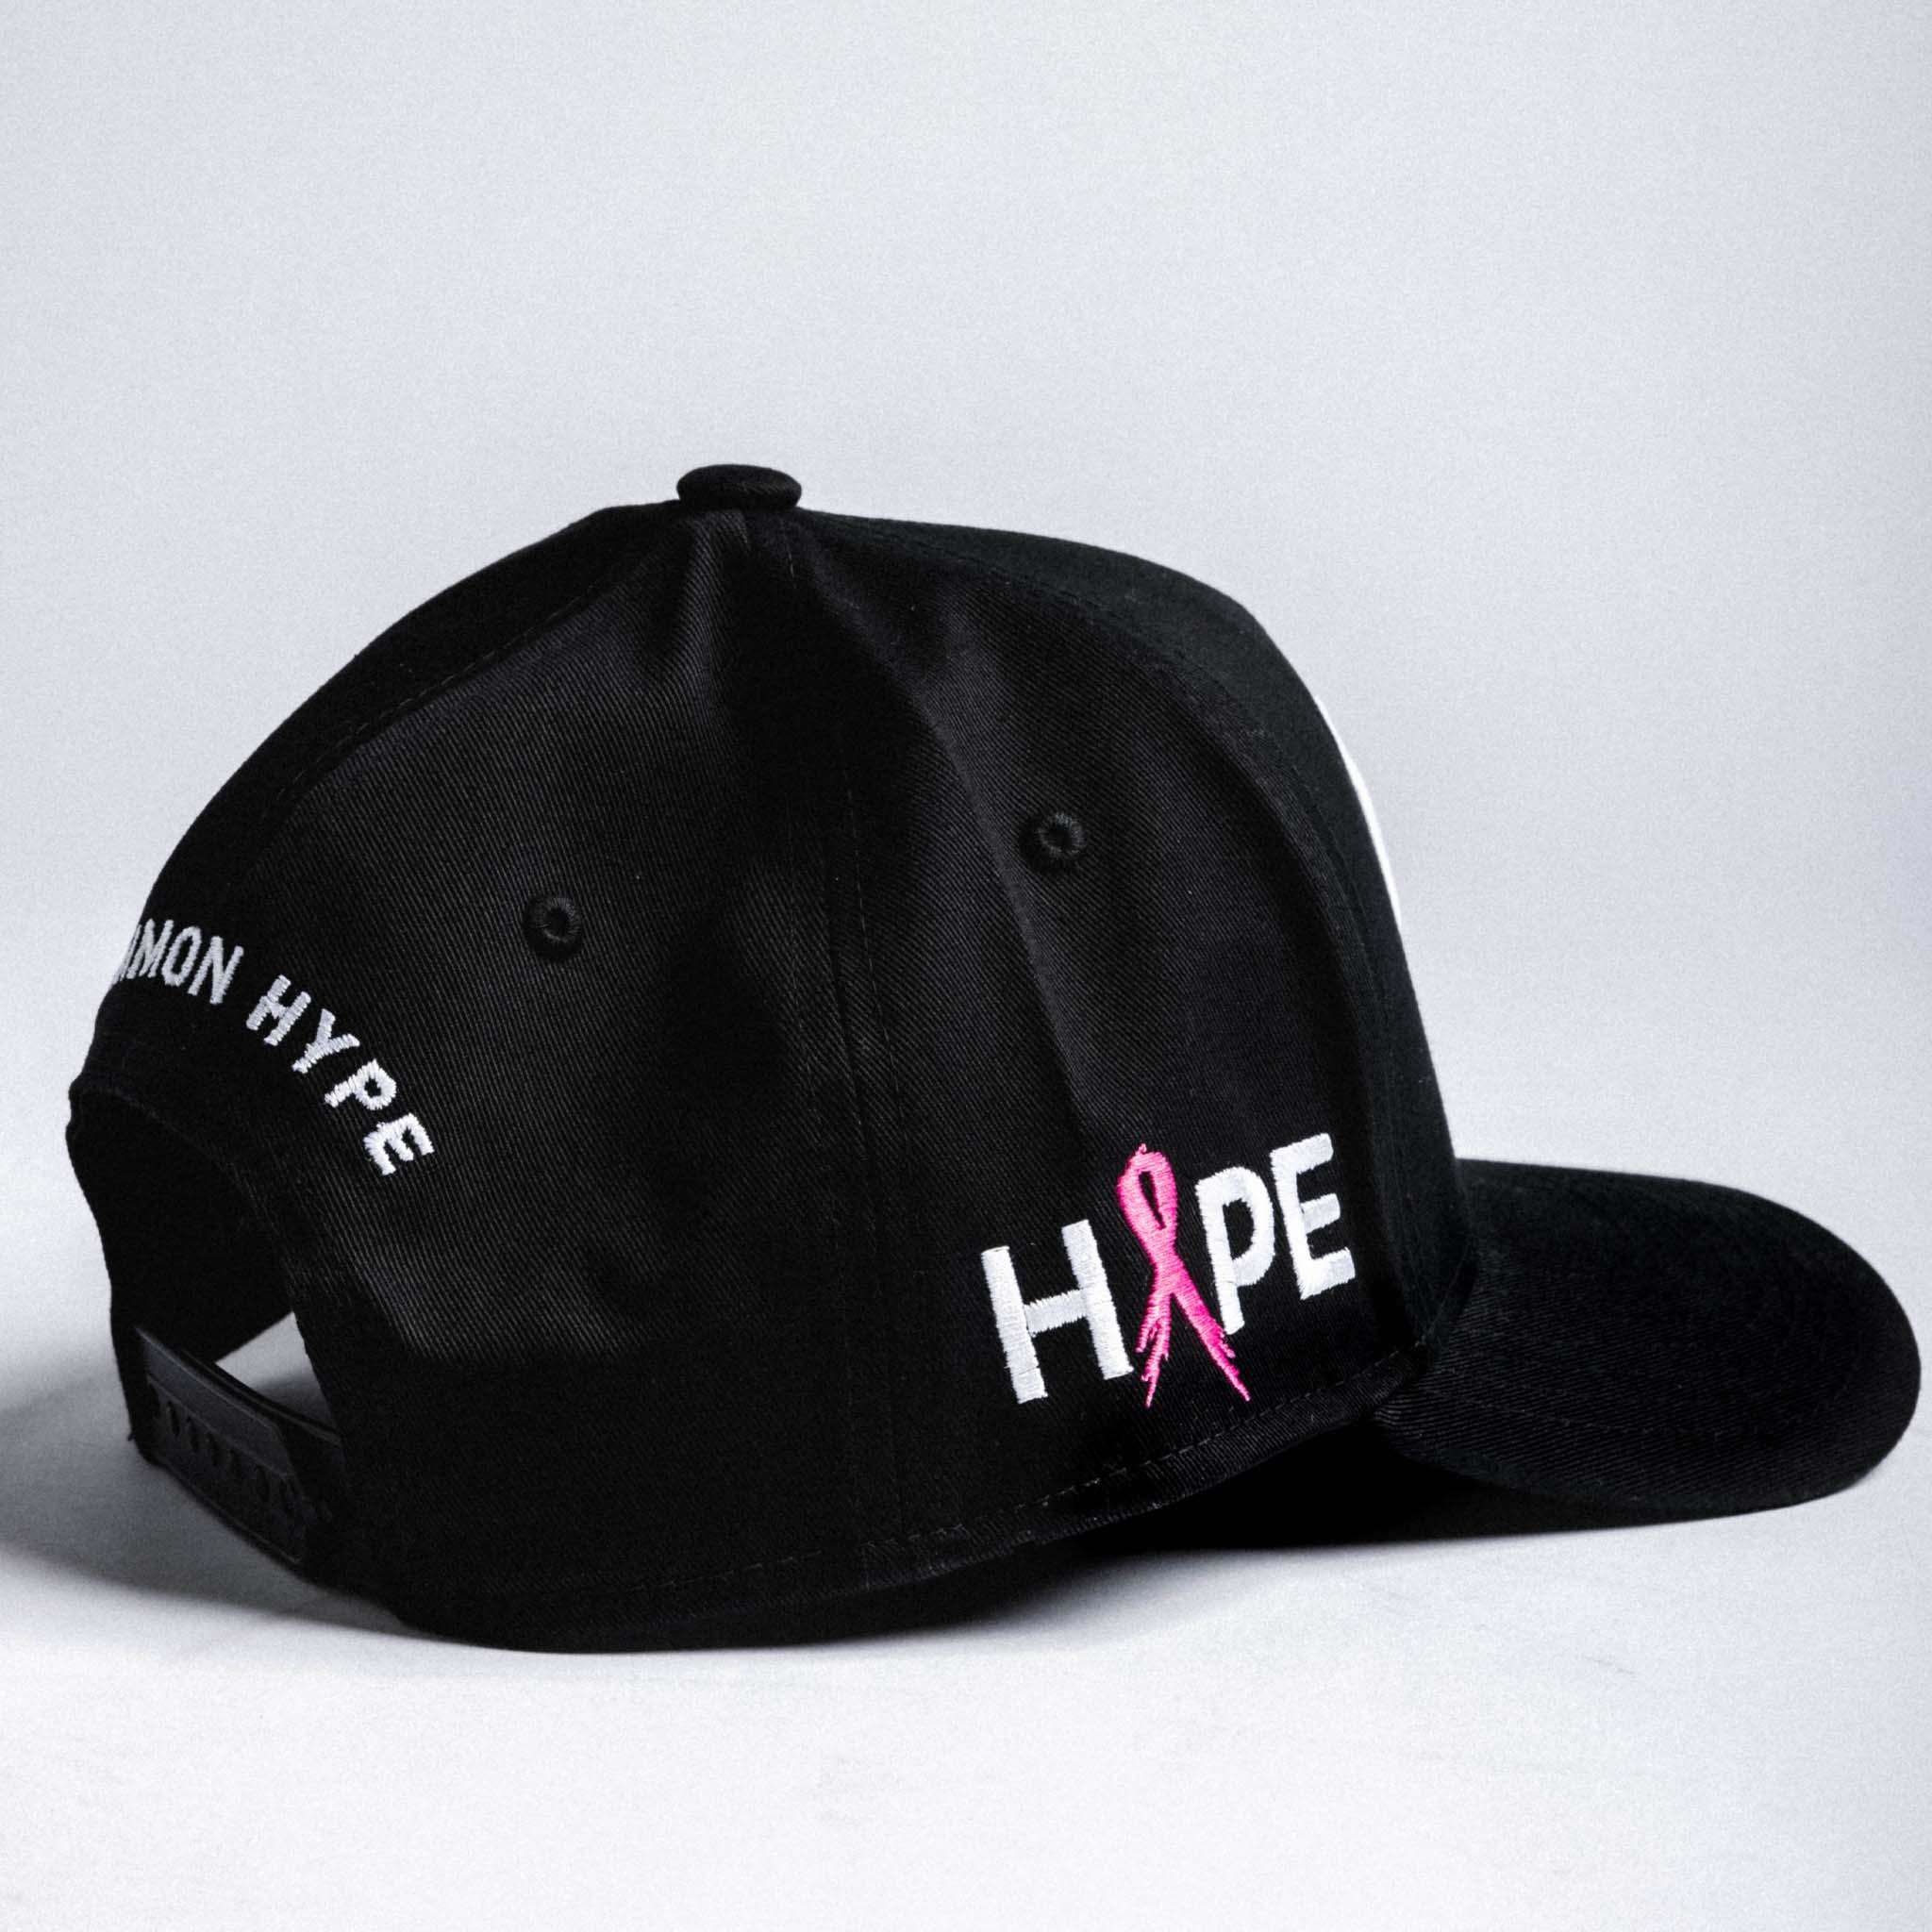 Common Hype Breast Cancer Awareness Hat